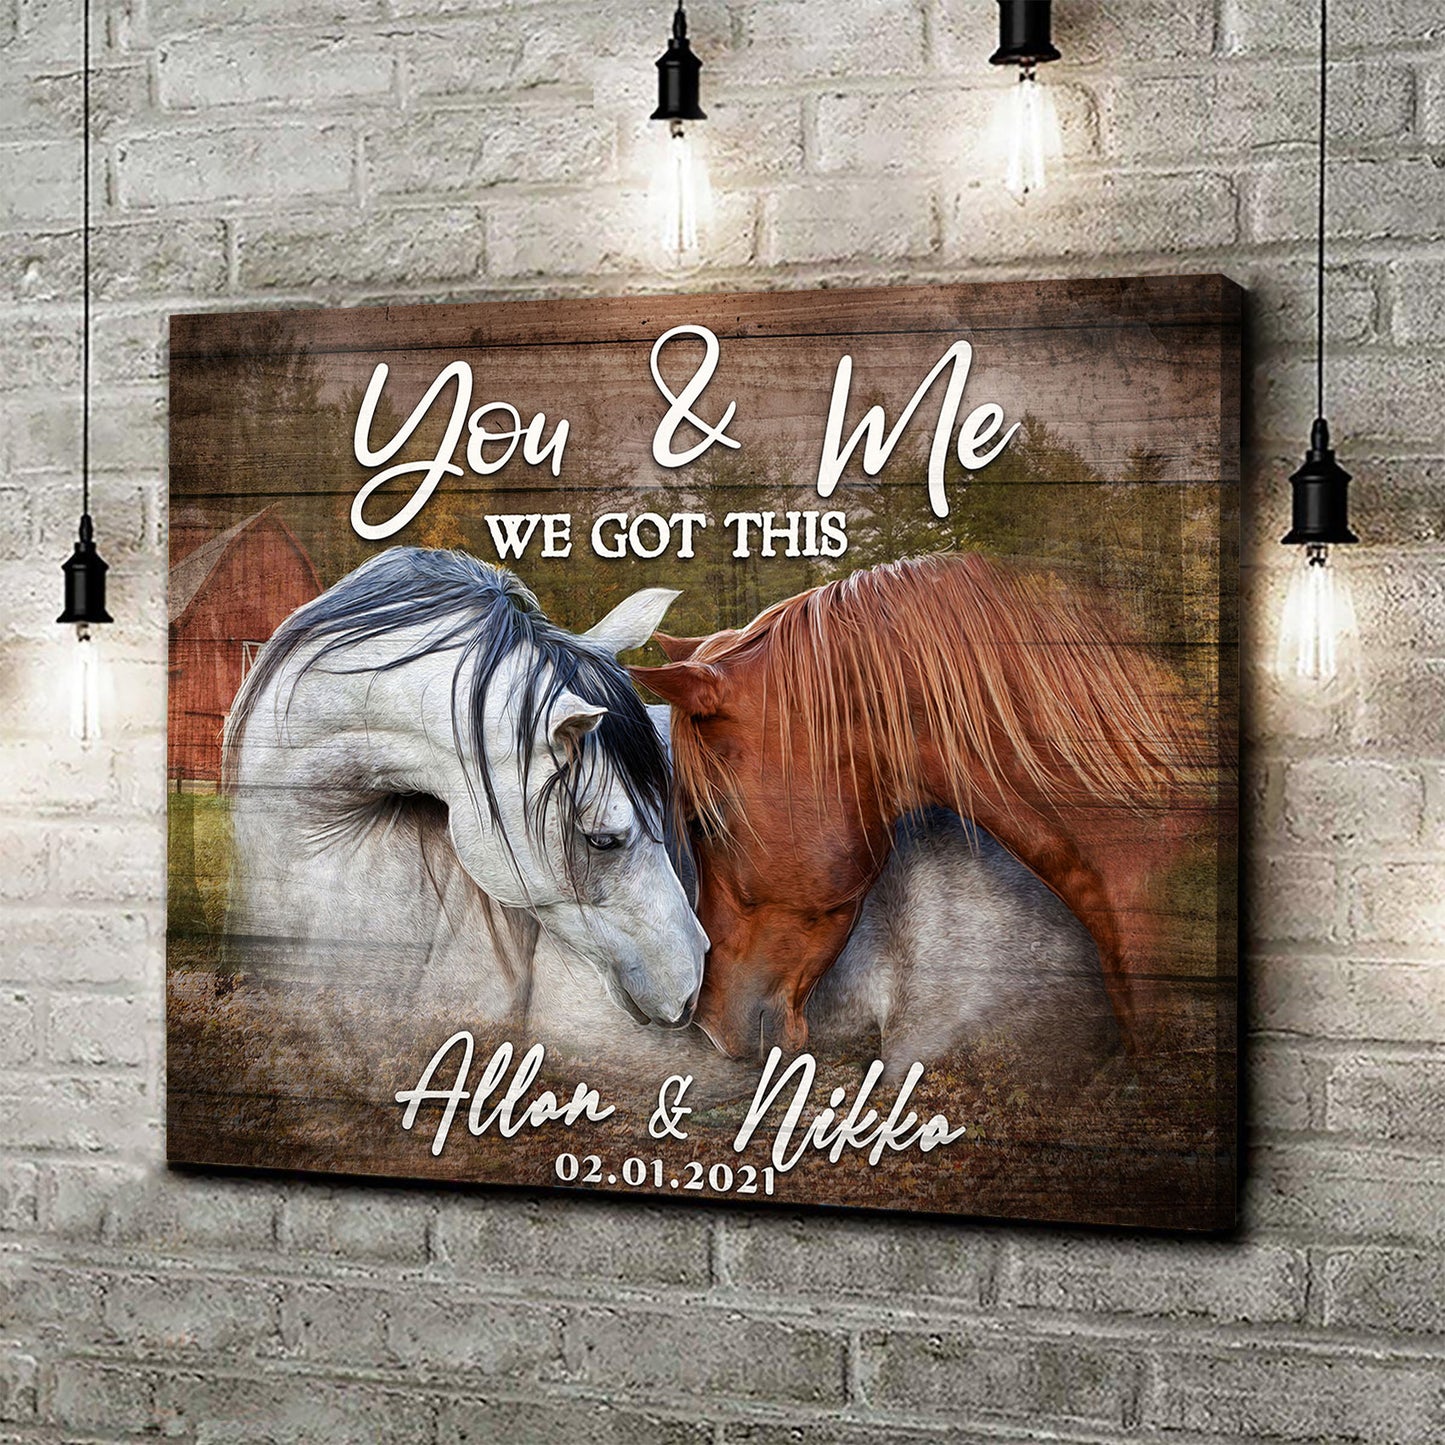 We Got This Couple Horse Sign - Image by Tailored Canvases